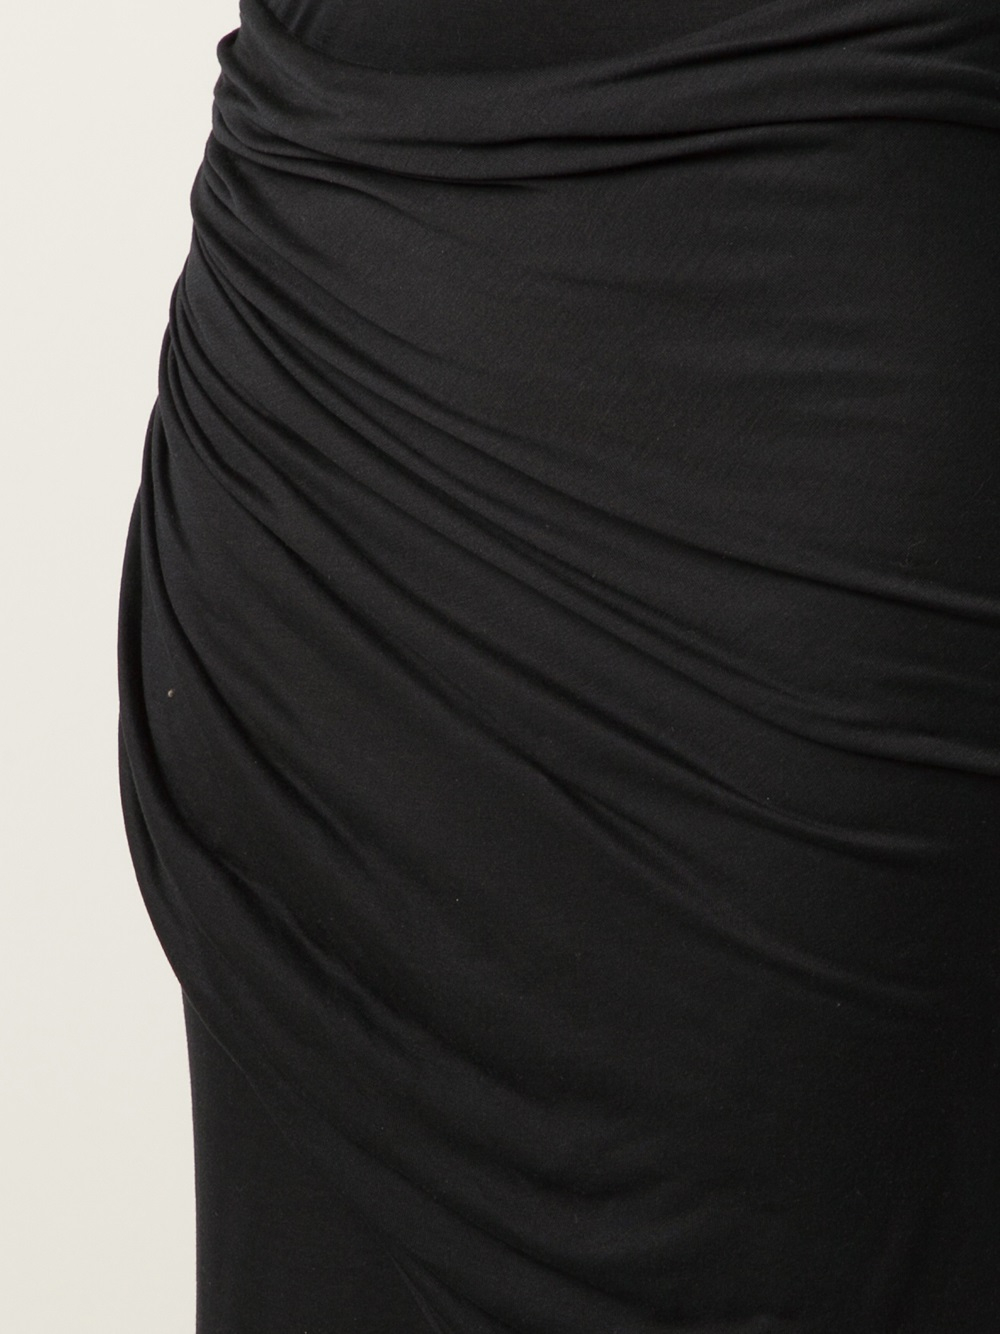 Givenchy Long Fitted Skirt in Black | Lyst